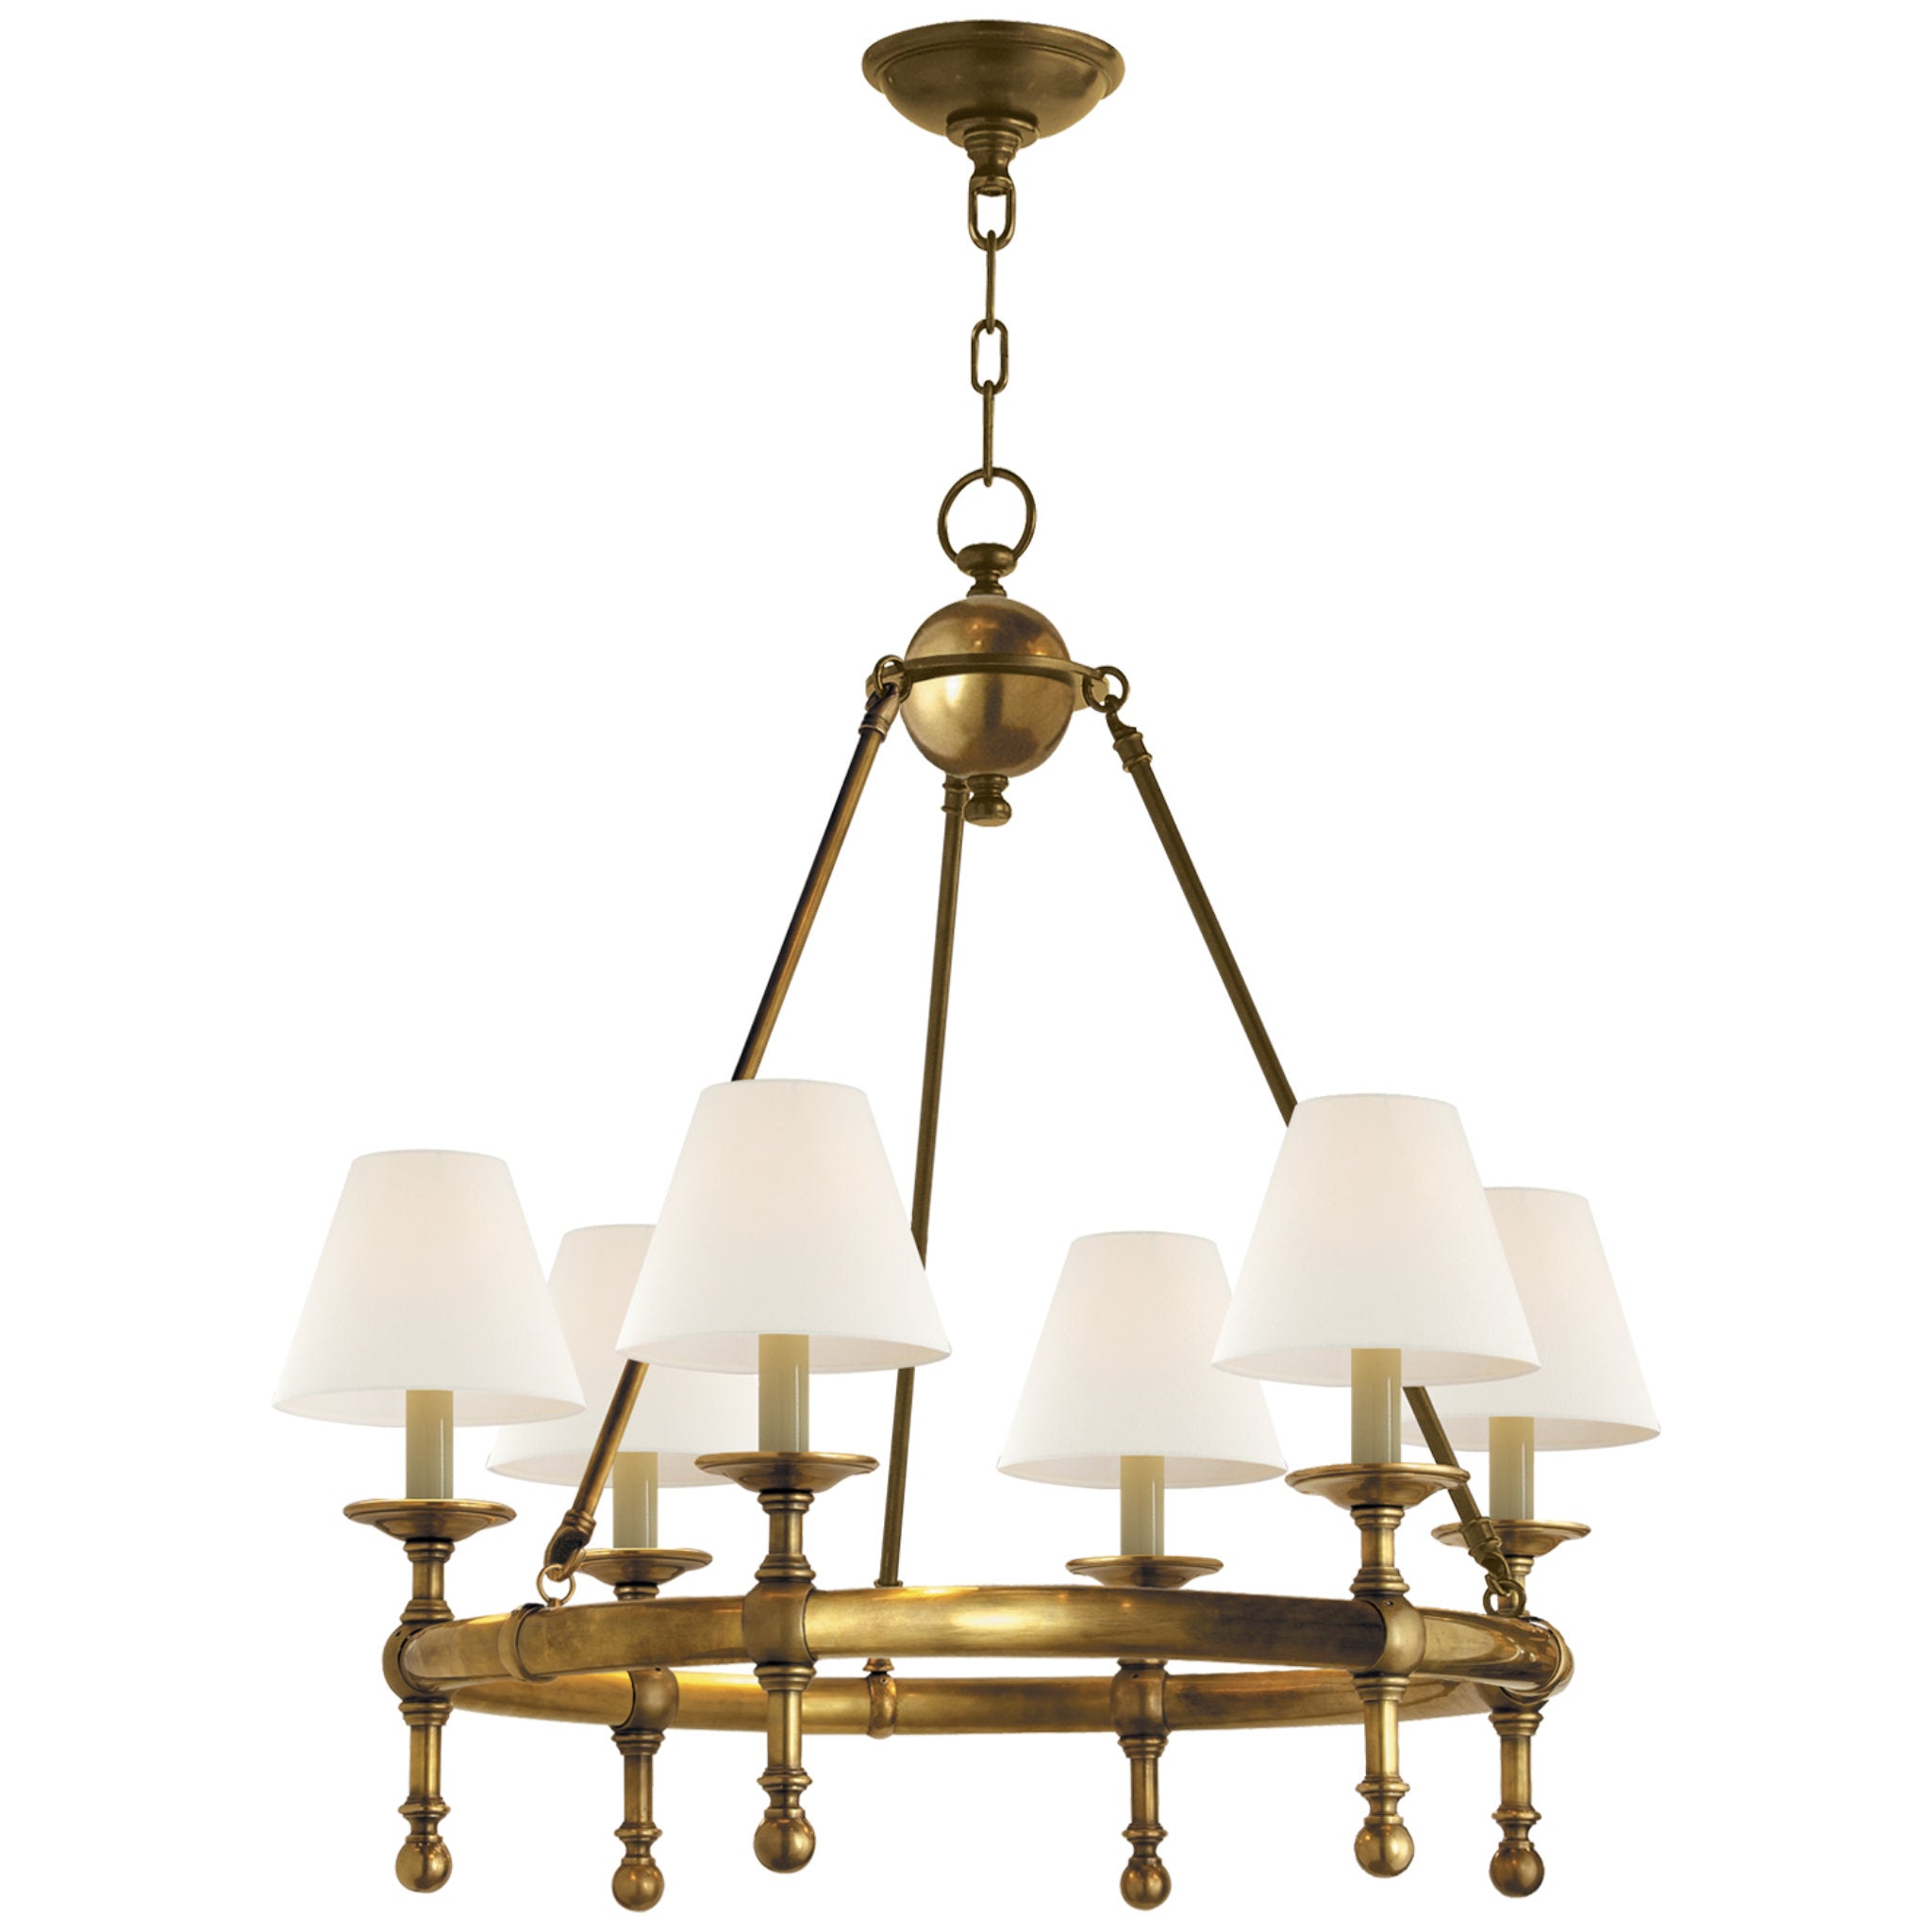 Chapman & Myers Classic Mini Ring Chandelier in Hand-Rubbed Antique Brass with Linen Shades